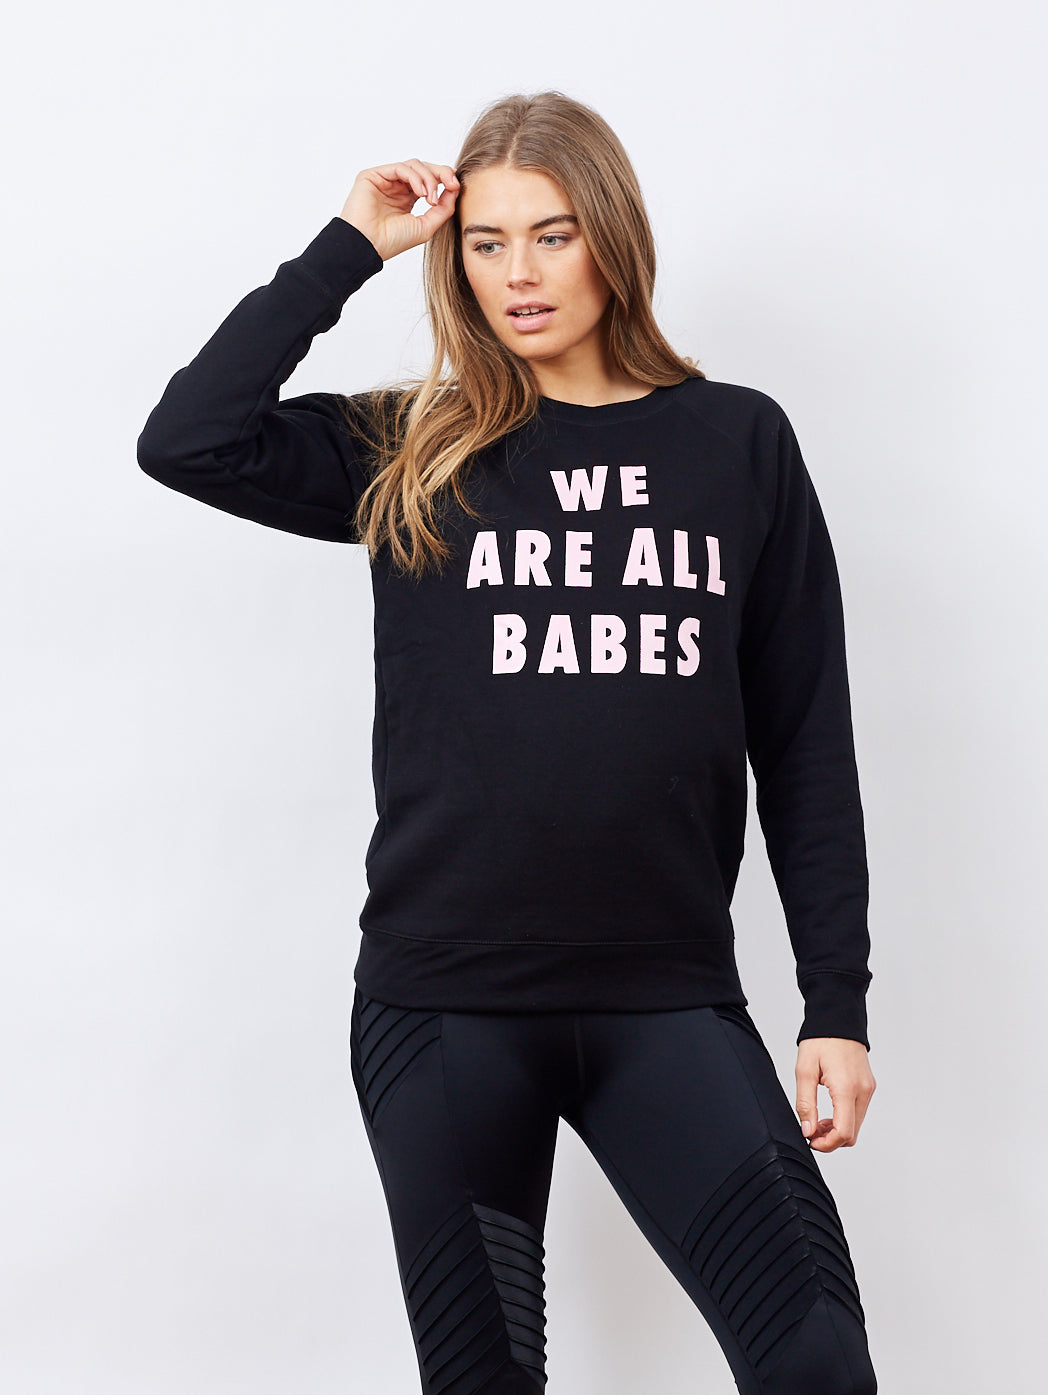 We Are All Babes Sweatshirt – Fashercise